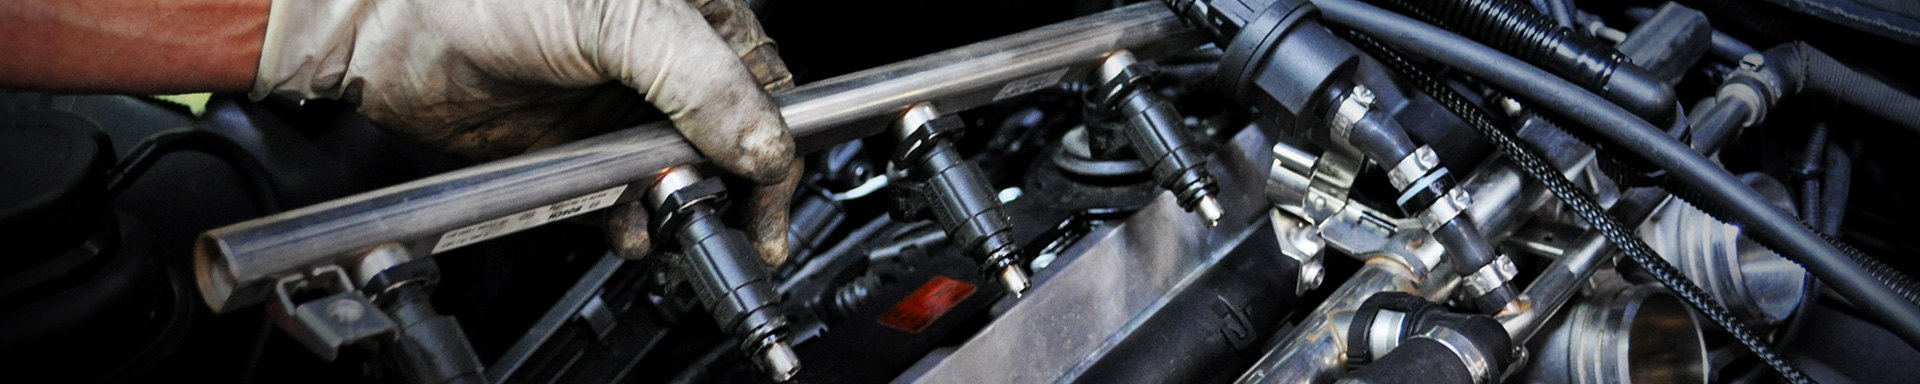 Six Affordable Engine Upgrades for the DIY Enthusiast